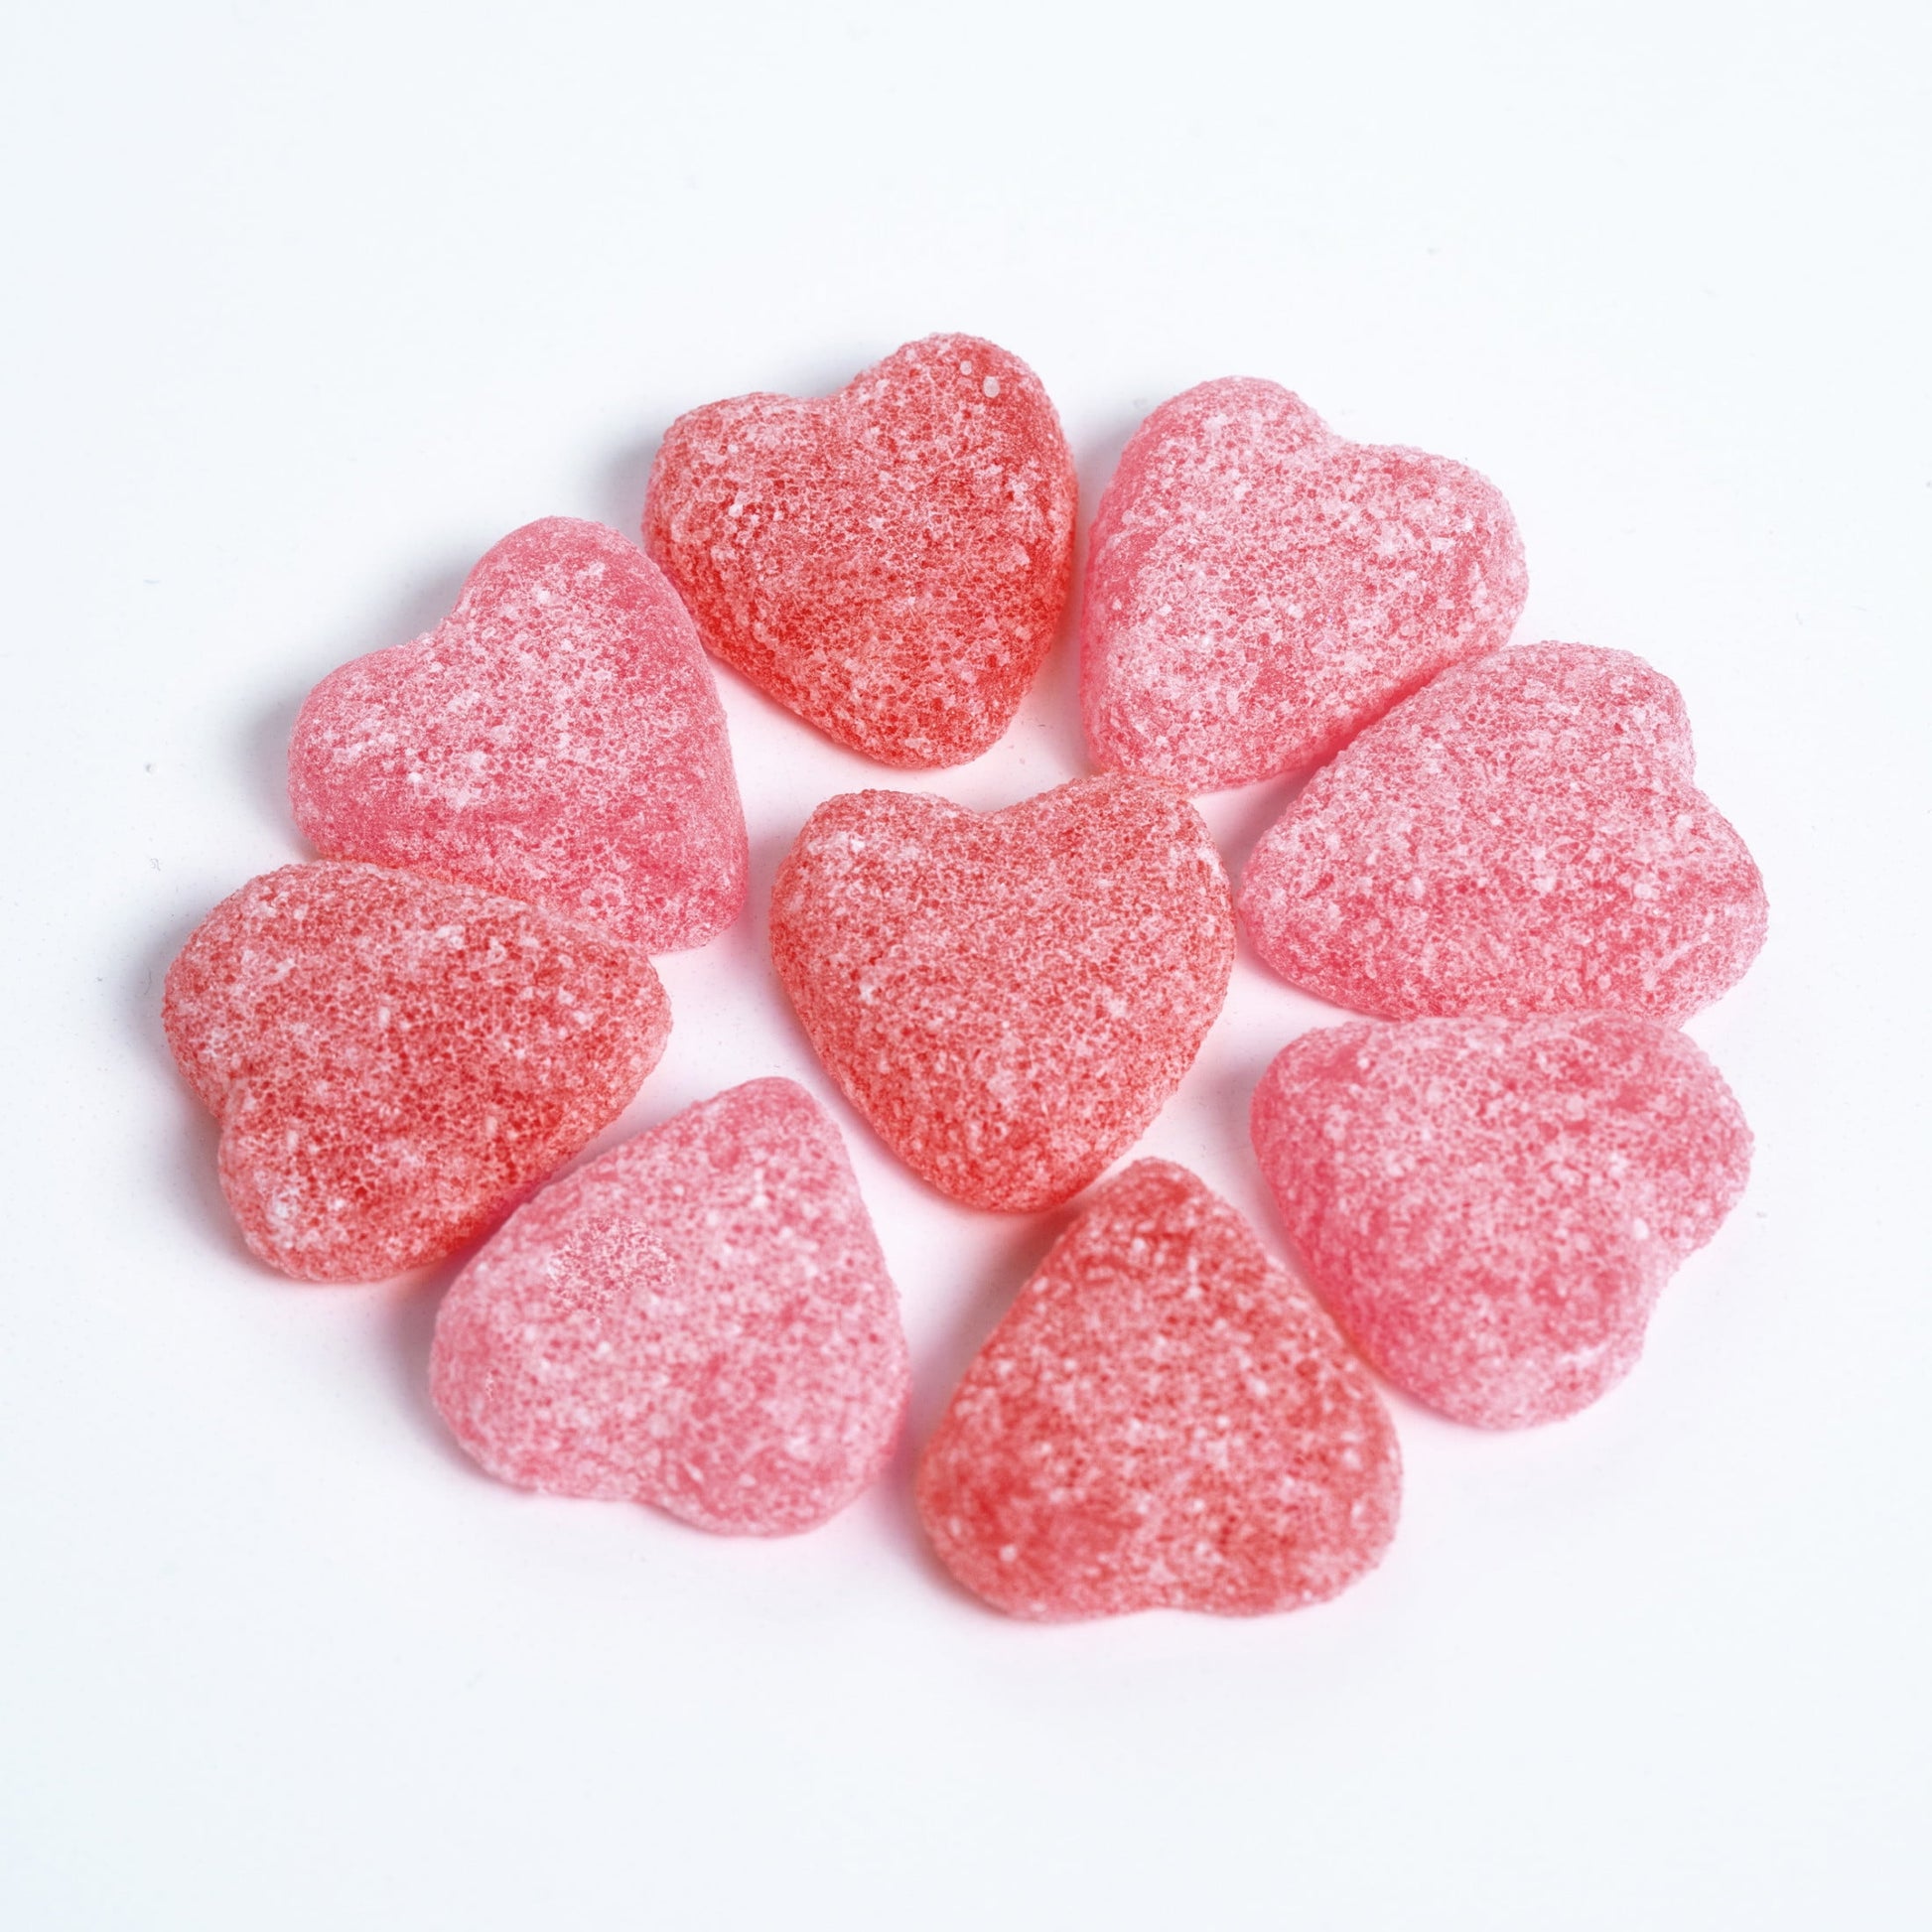 Soft & Chewy Valentines Day Candy Hearts, 3.1 Oz